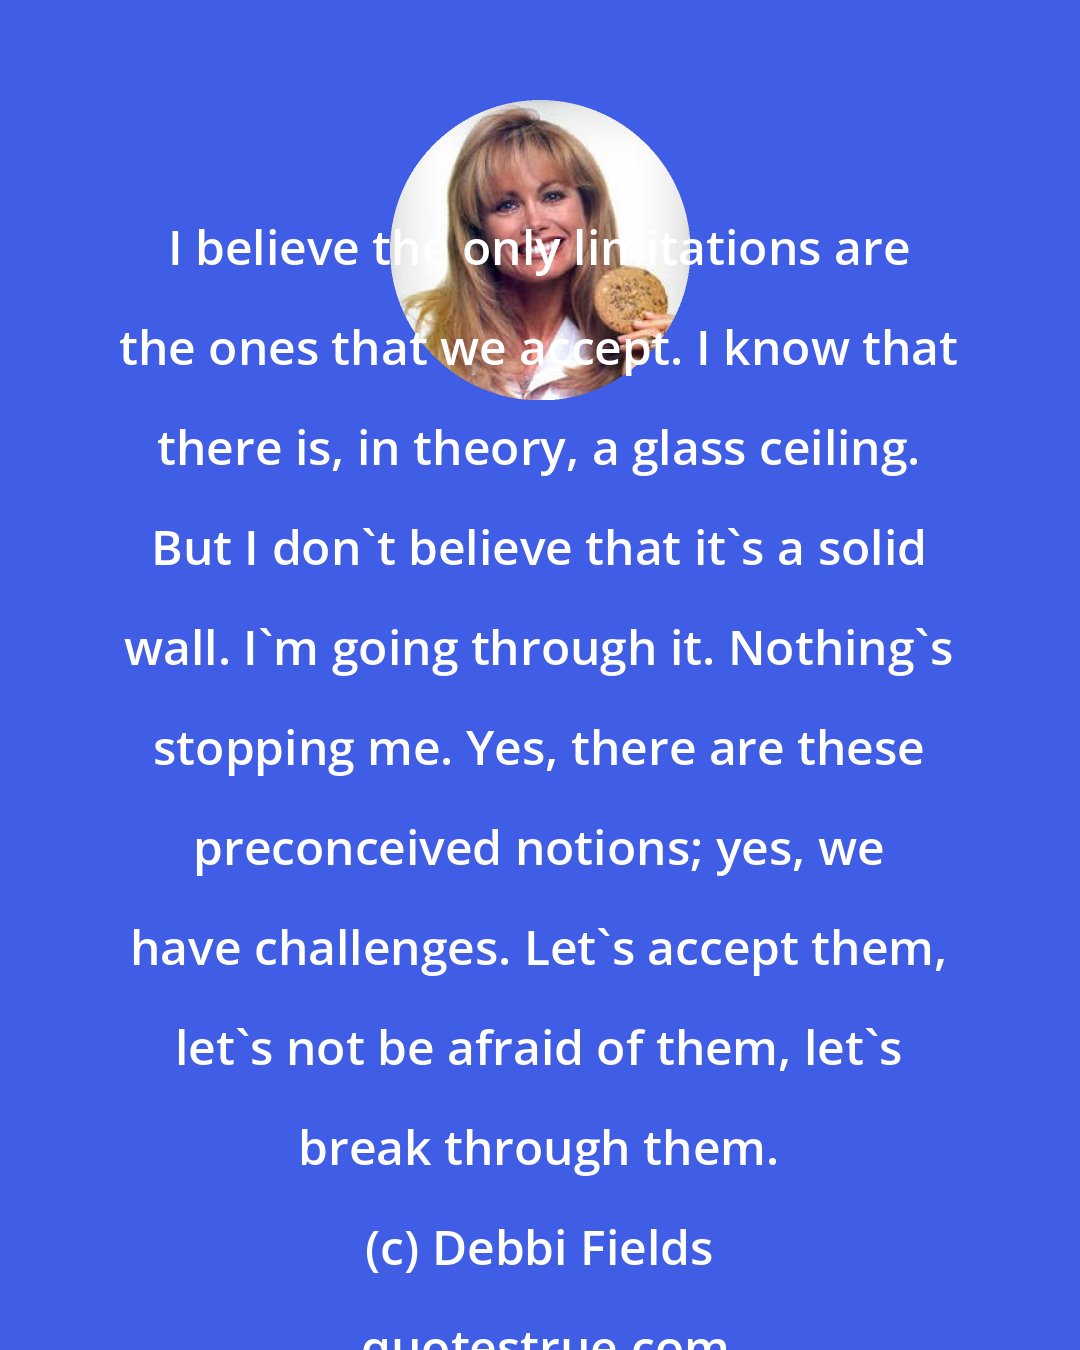 Debbi Fields: I believe the only limitations are the ones that we accept. I know that there is, in theory, a glass ceiling. But I don't believe that it's a solid wall. I'm going through it. Nothing's stopping me. Yes, there are these preconceived notions; yes, we have challenges. Let's accept them, let's not be afraid of them, let's break through them.